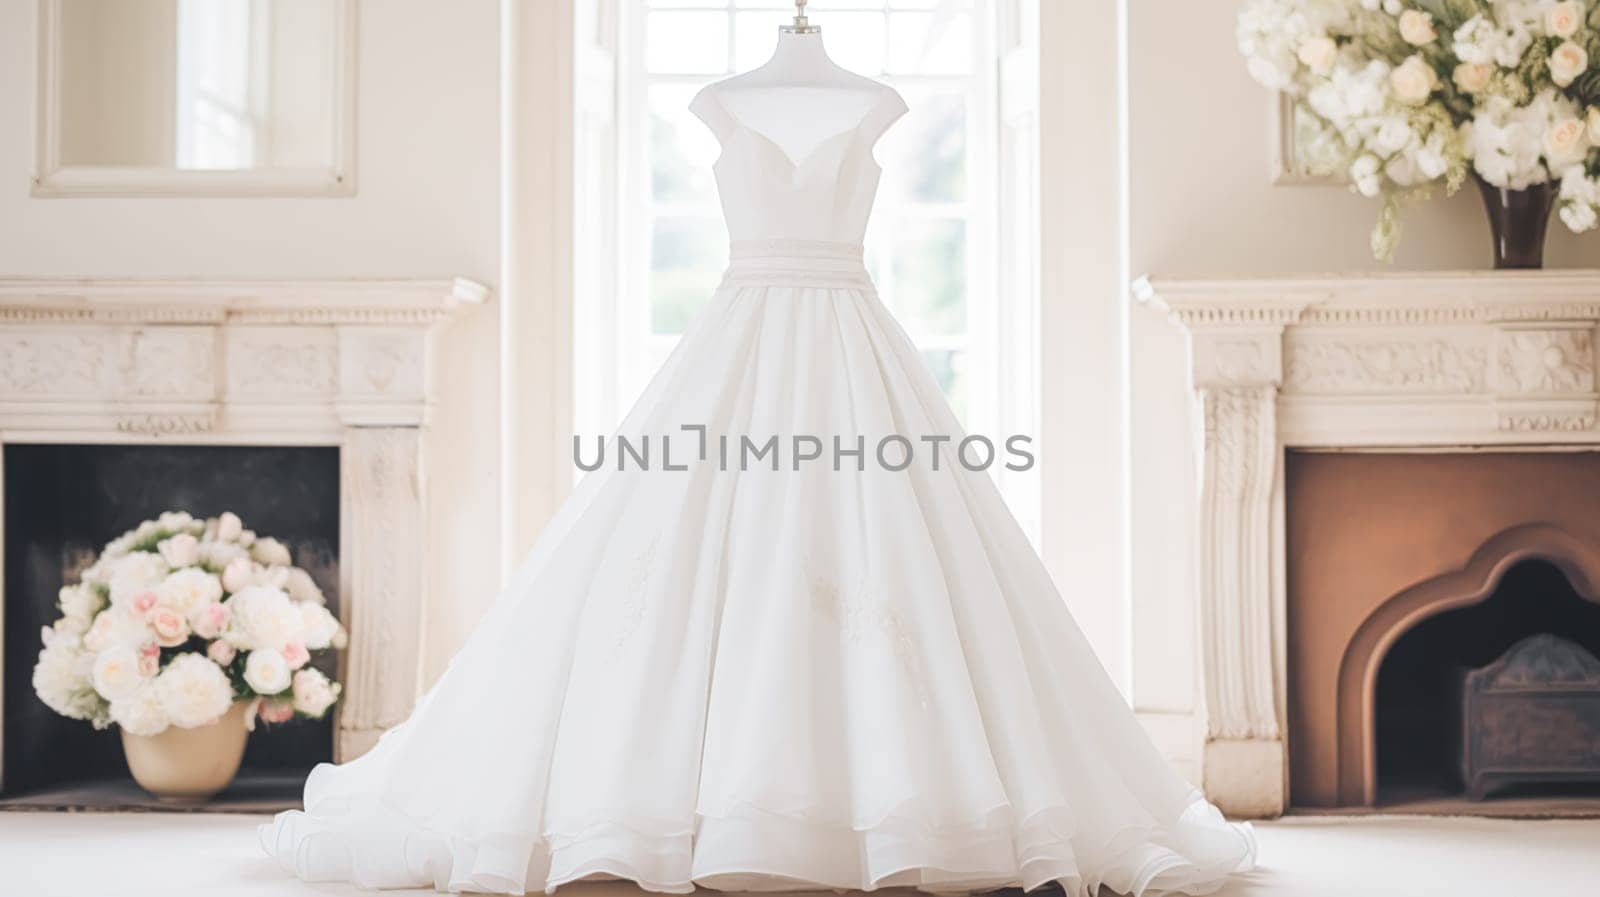 Wedding drees, bridal gown style and bespoke fashion, full-legth white tailored ball gown in showroom, tailor fitting, beauty and wedding inspiration